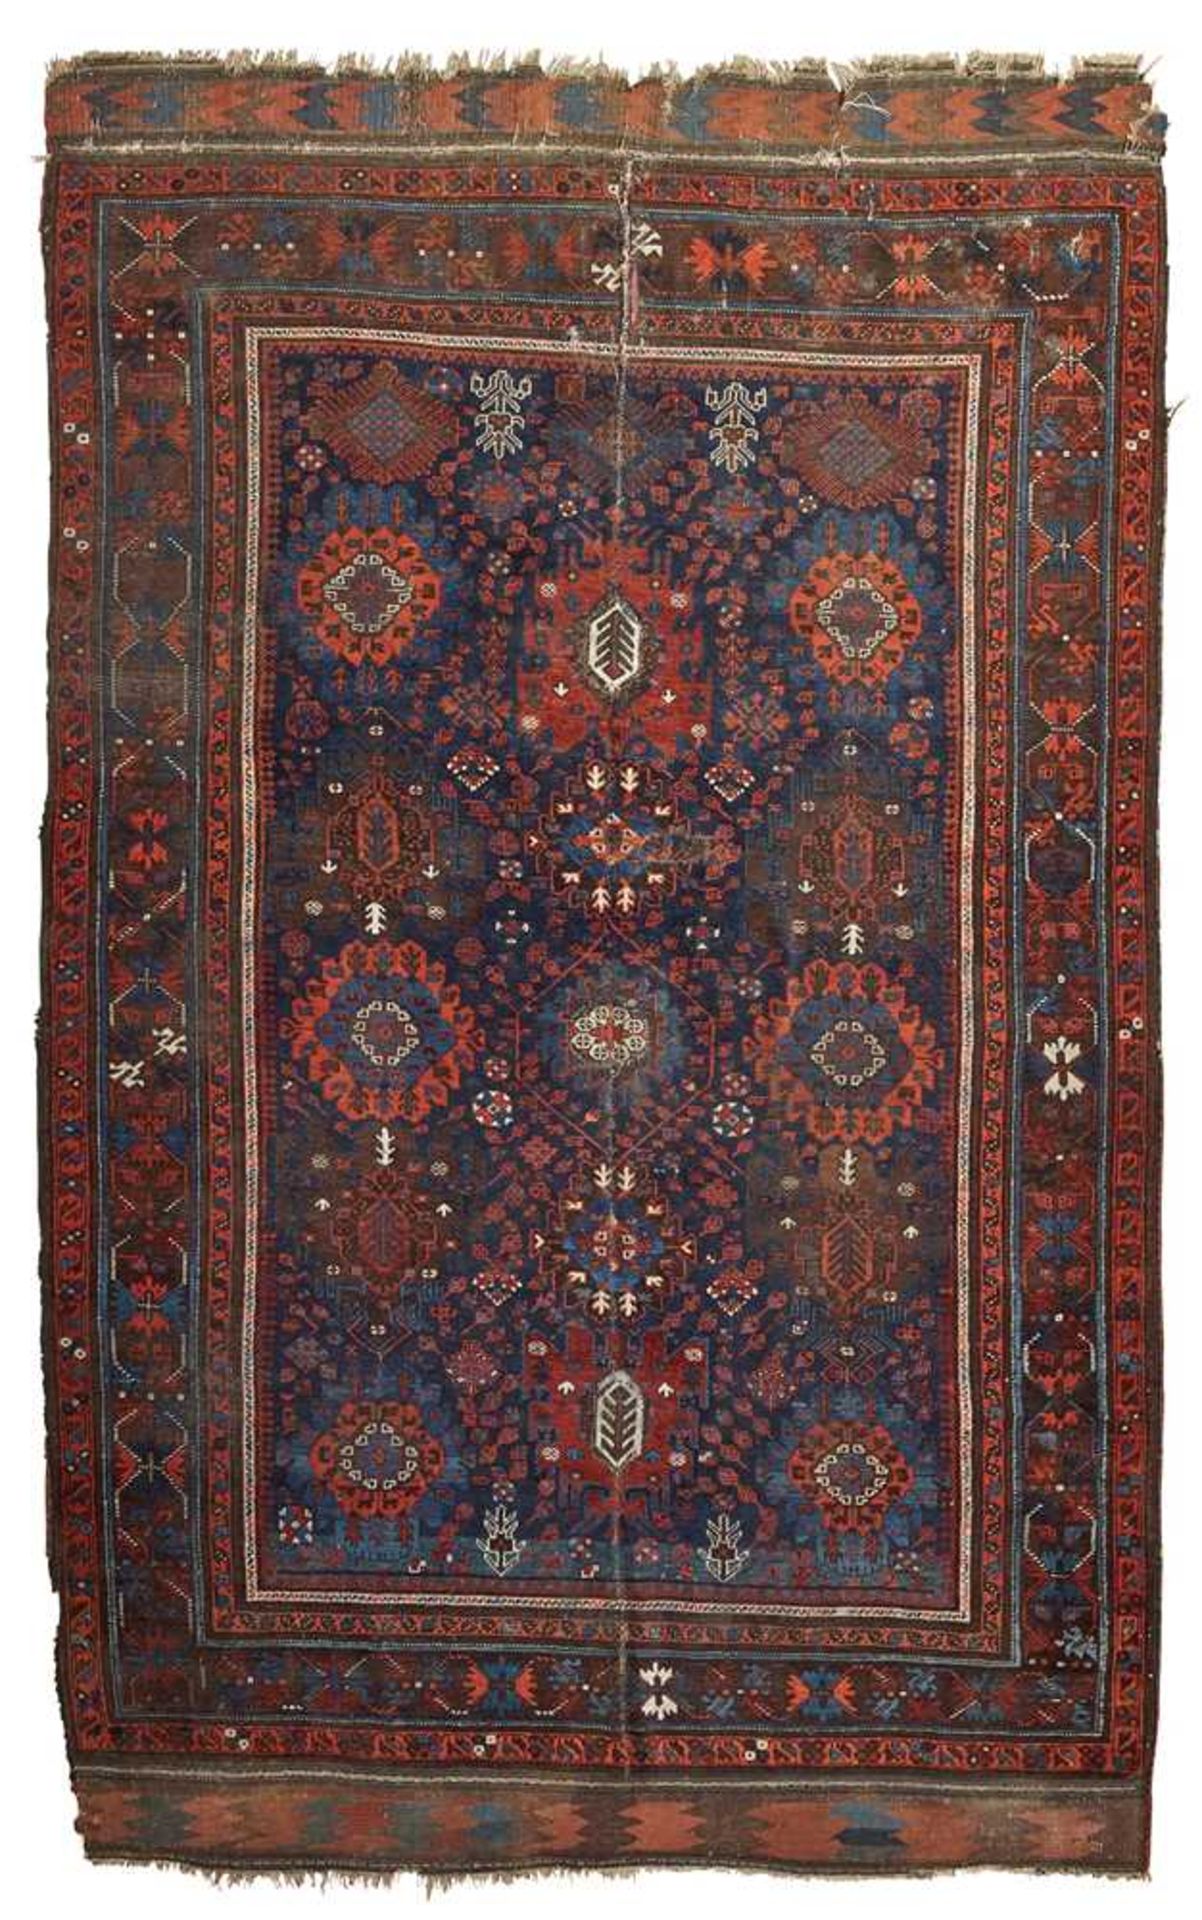 BELOUCH CARPET NORTHEAST PERSIA, LATE 19TH/EARLY 20TH CENTURY